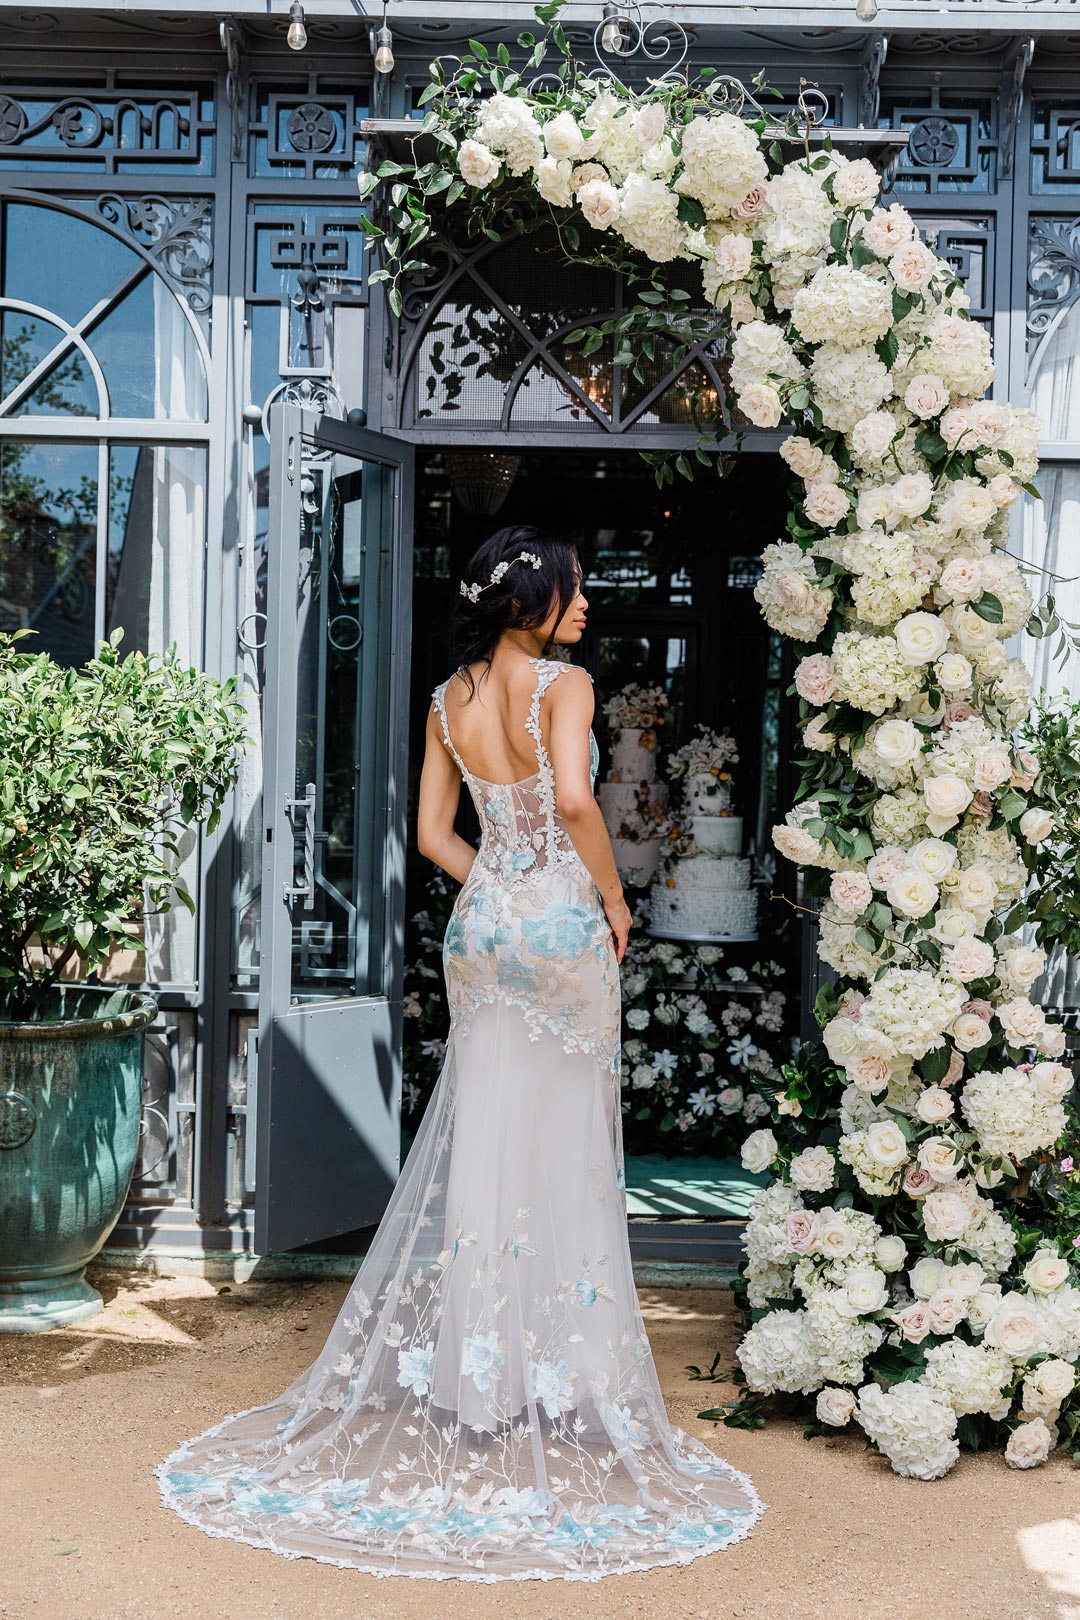 Wedding Dress Odessa Blue in front of Floral Archway